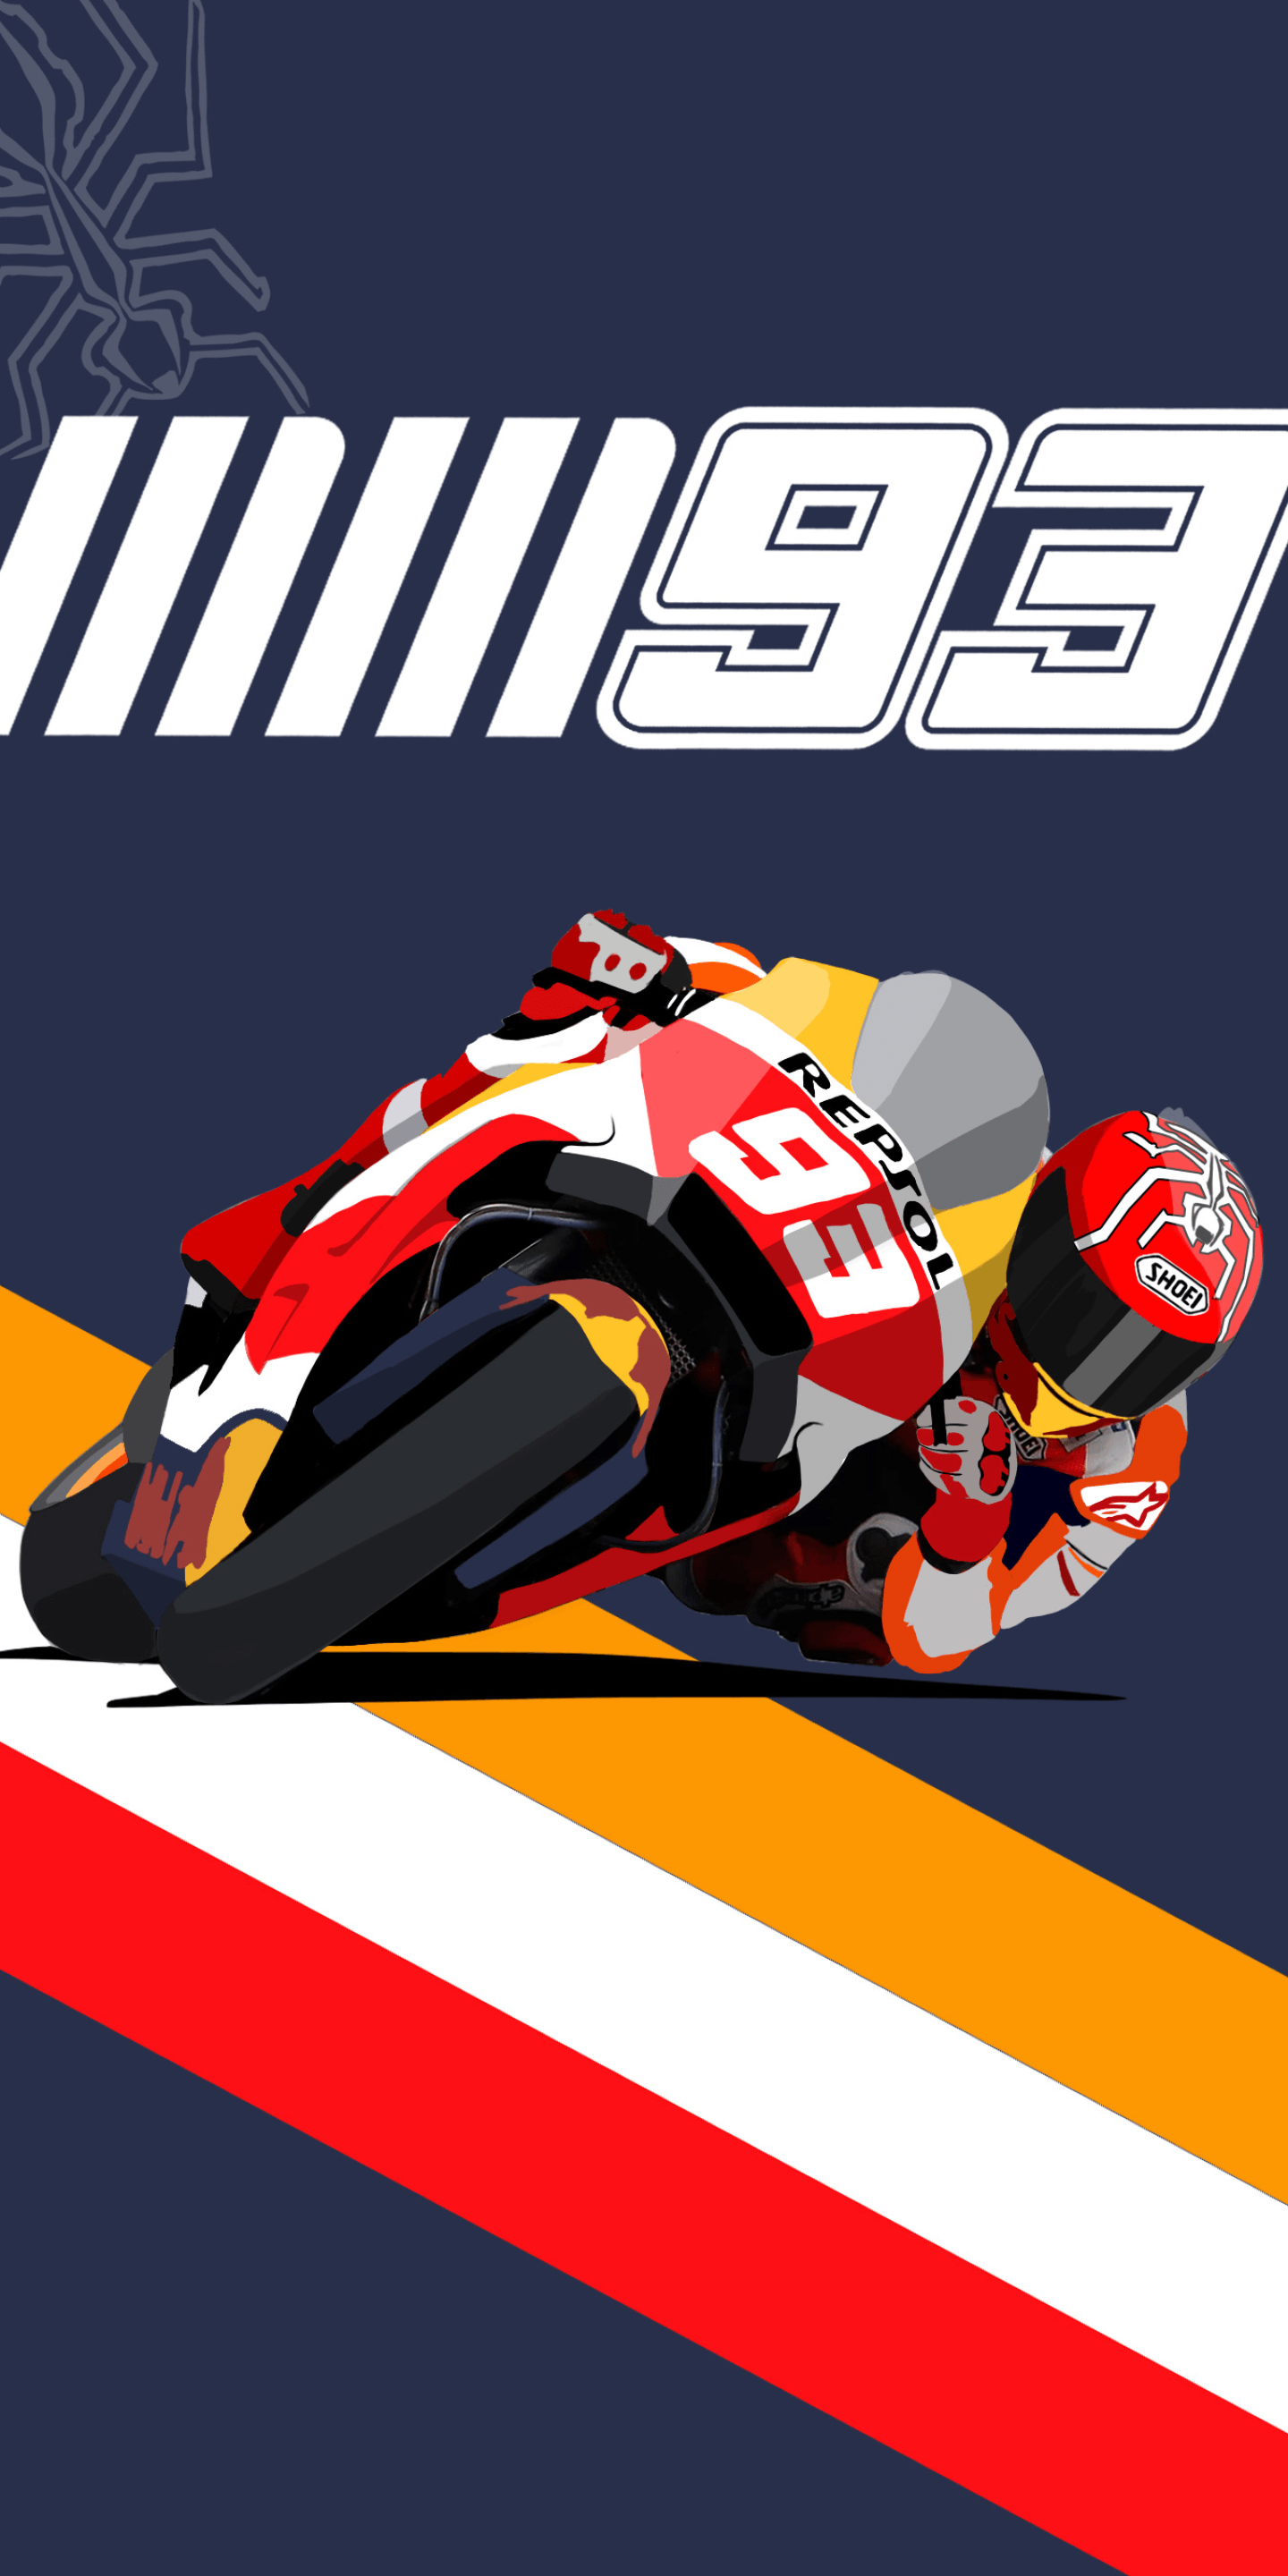 I did something today! MM93 wallpaper for all you Marquez